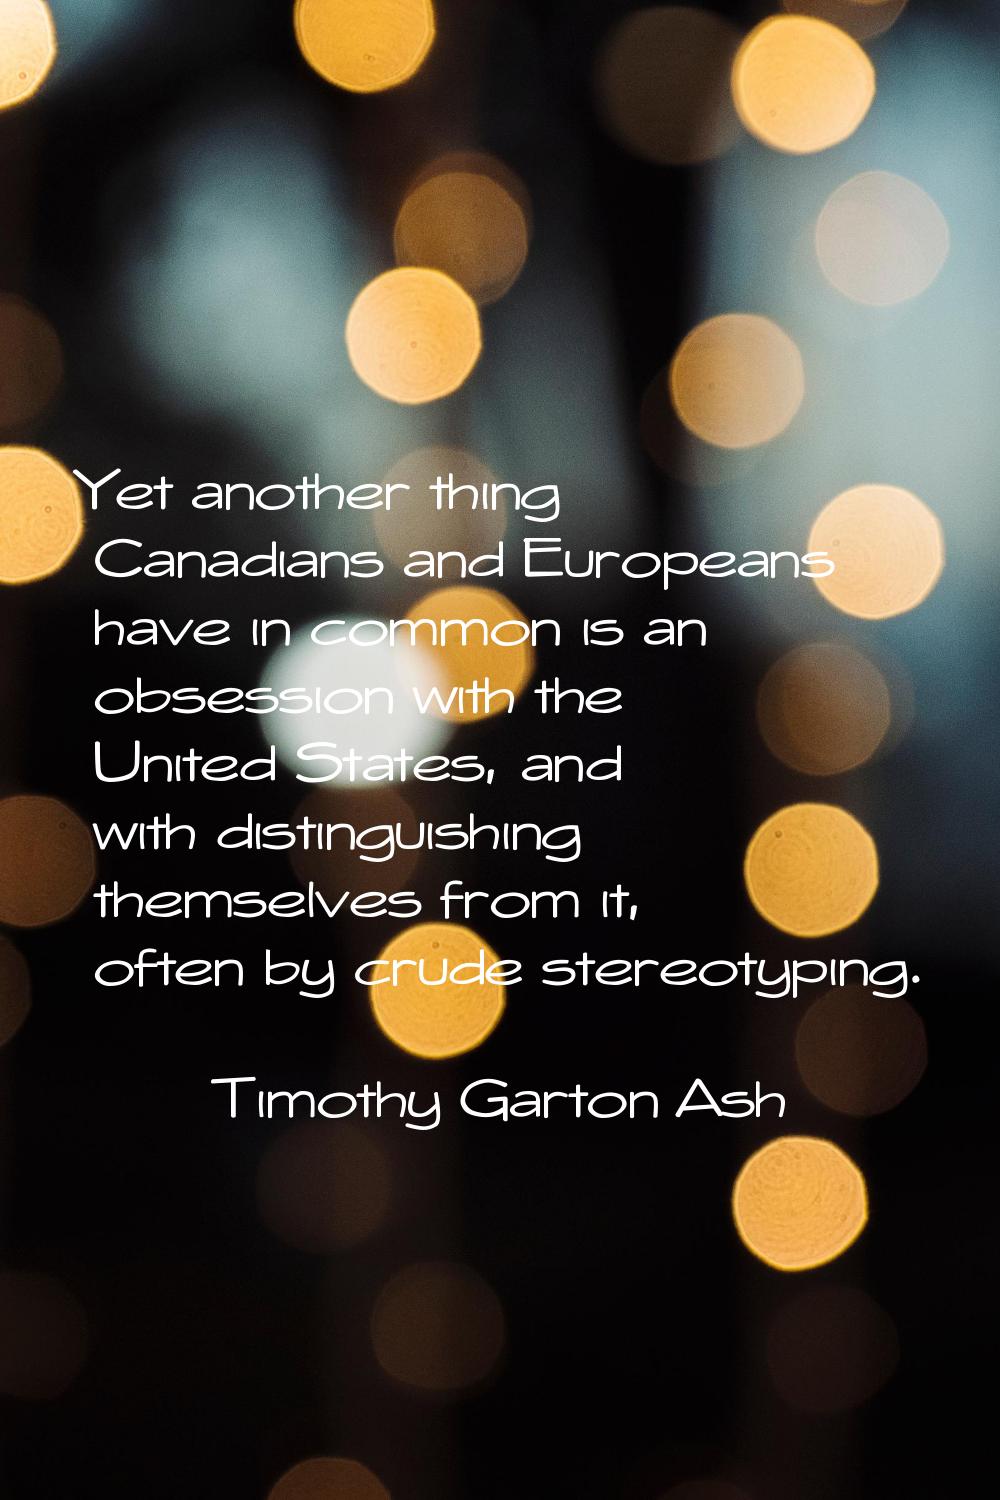 Yet another thing Canadians and Europeans have in common is an obsession with the United States, an